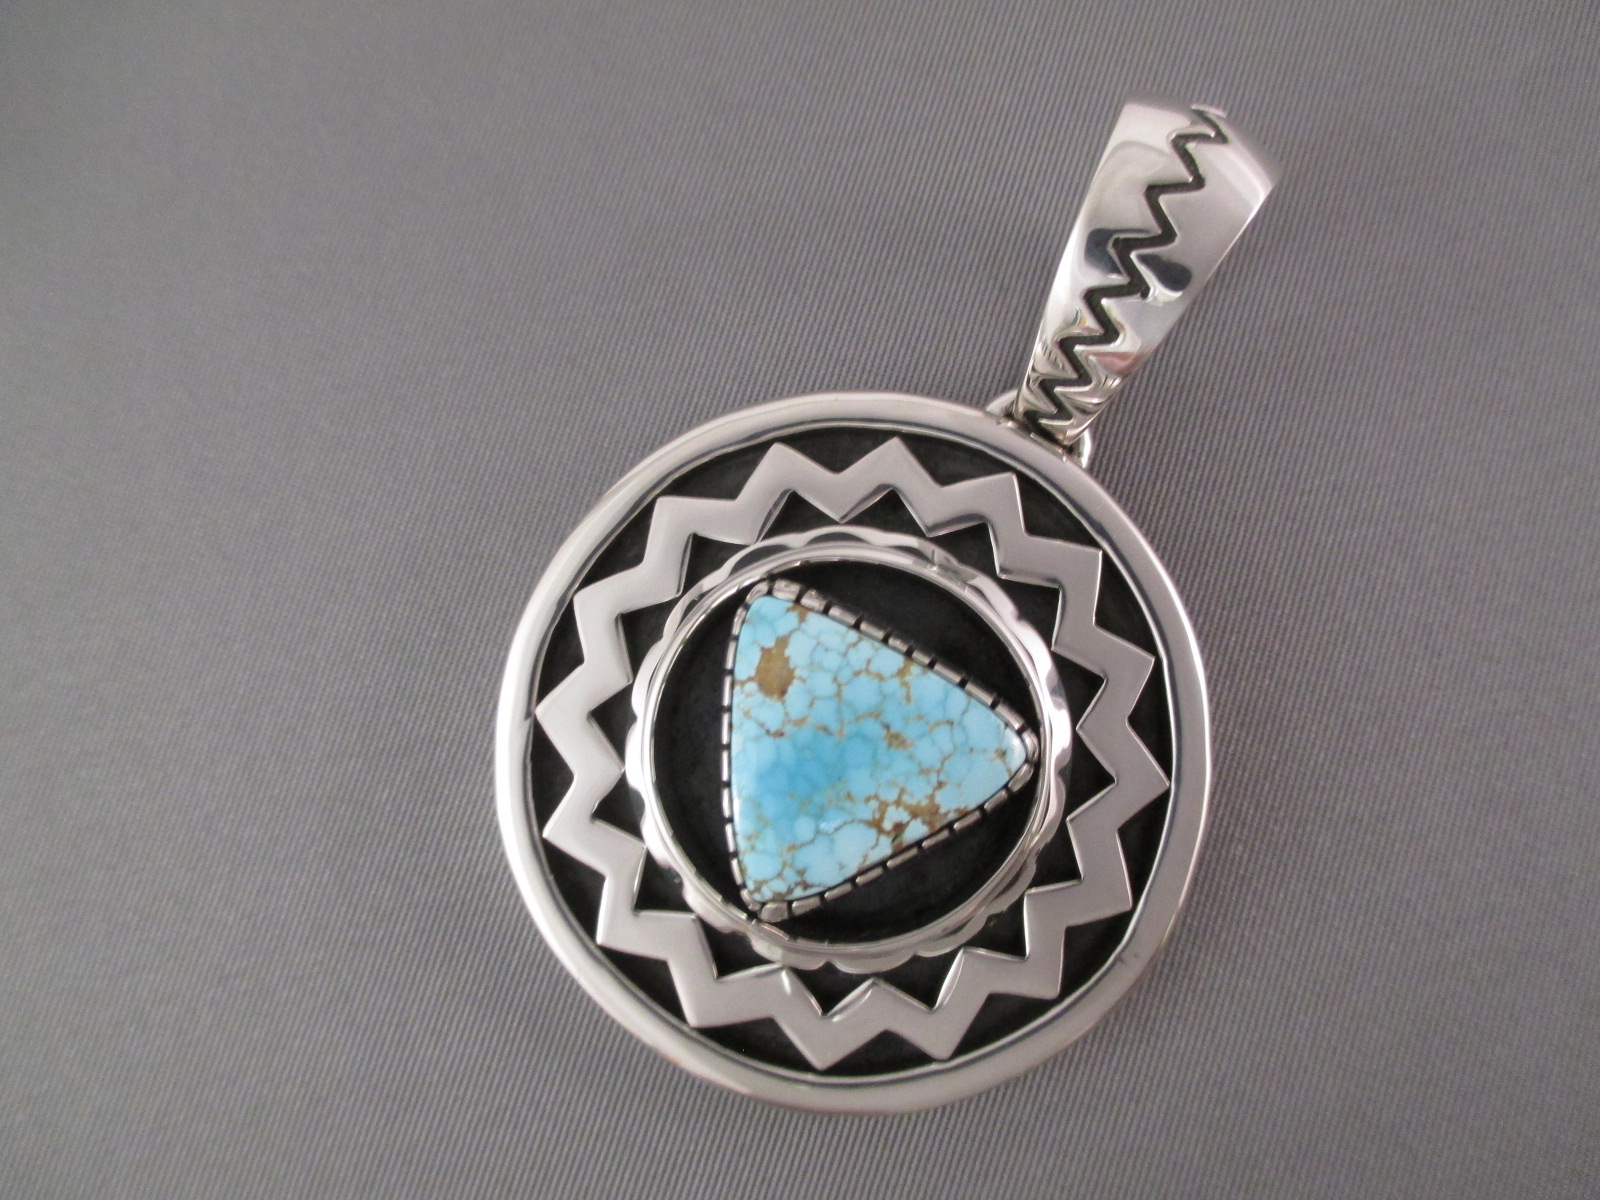 Turquoise Jewelry - Number 8 Turquoise Pendant by Navajo jewelry artist, Kyle Lee $695-